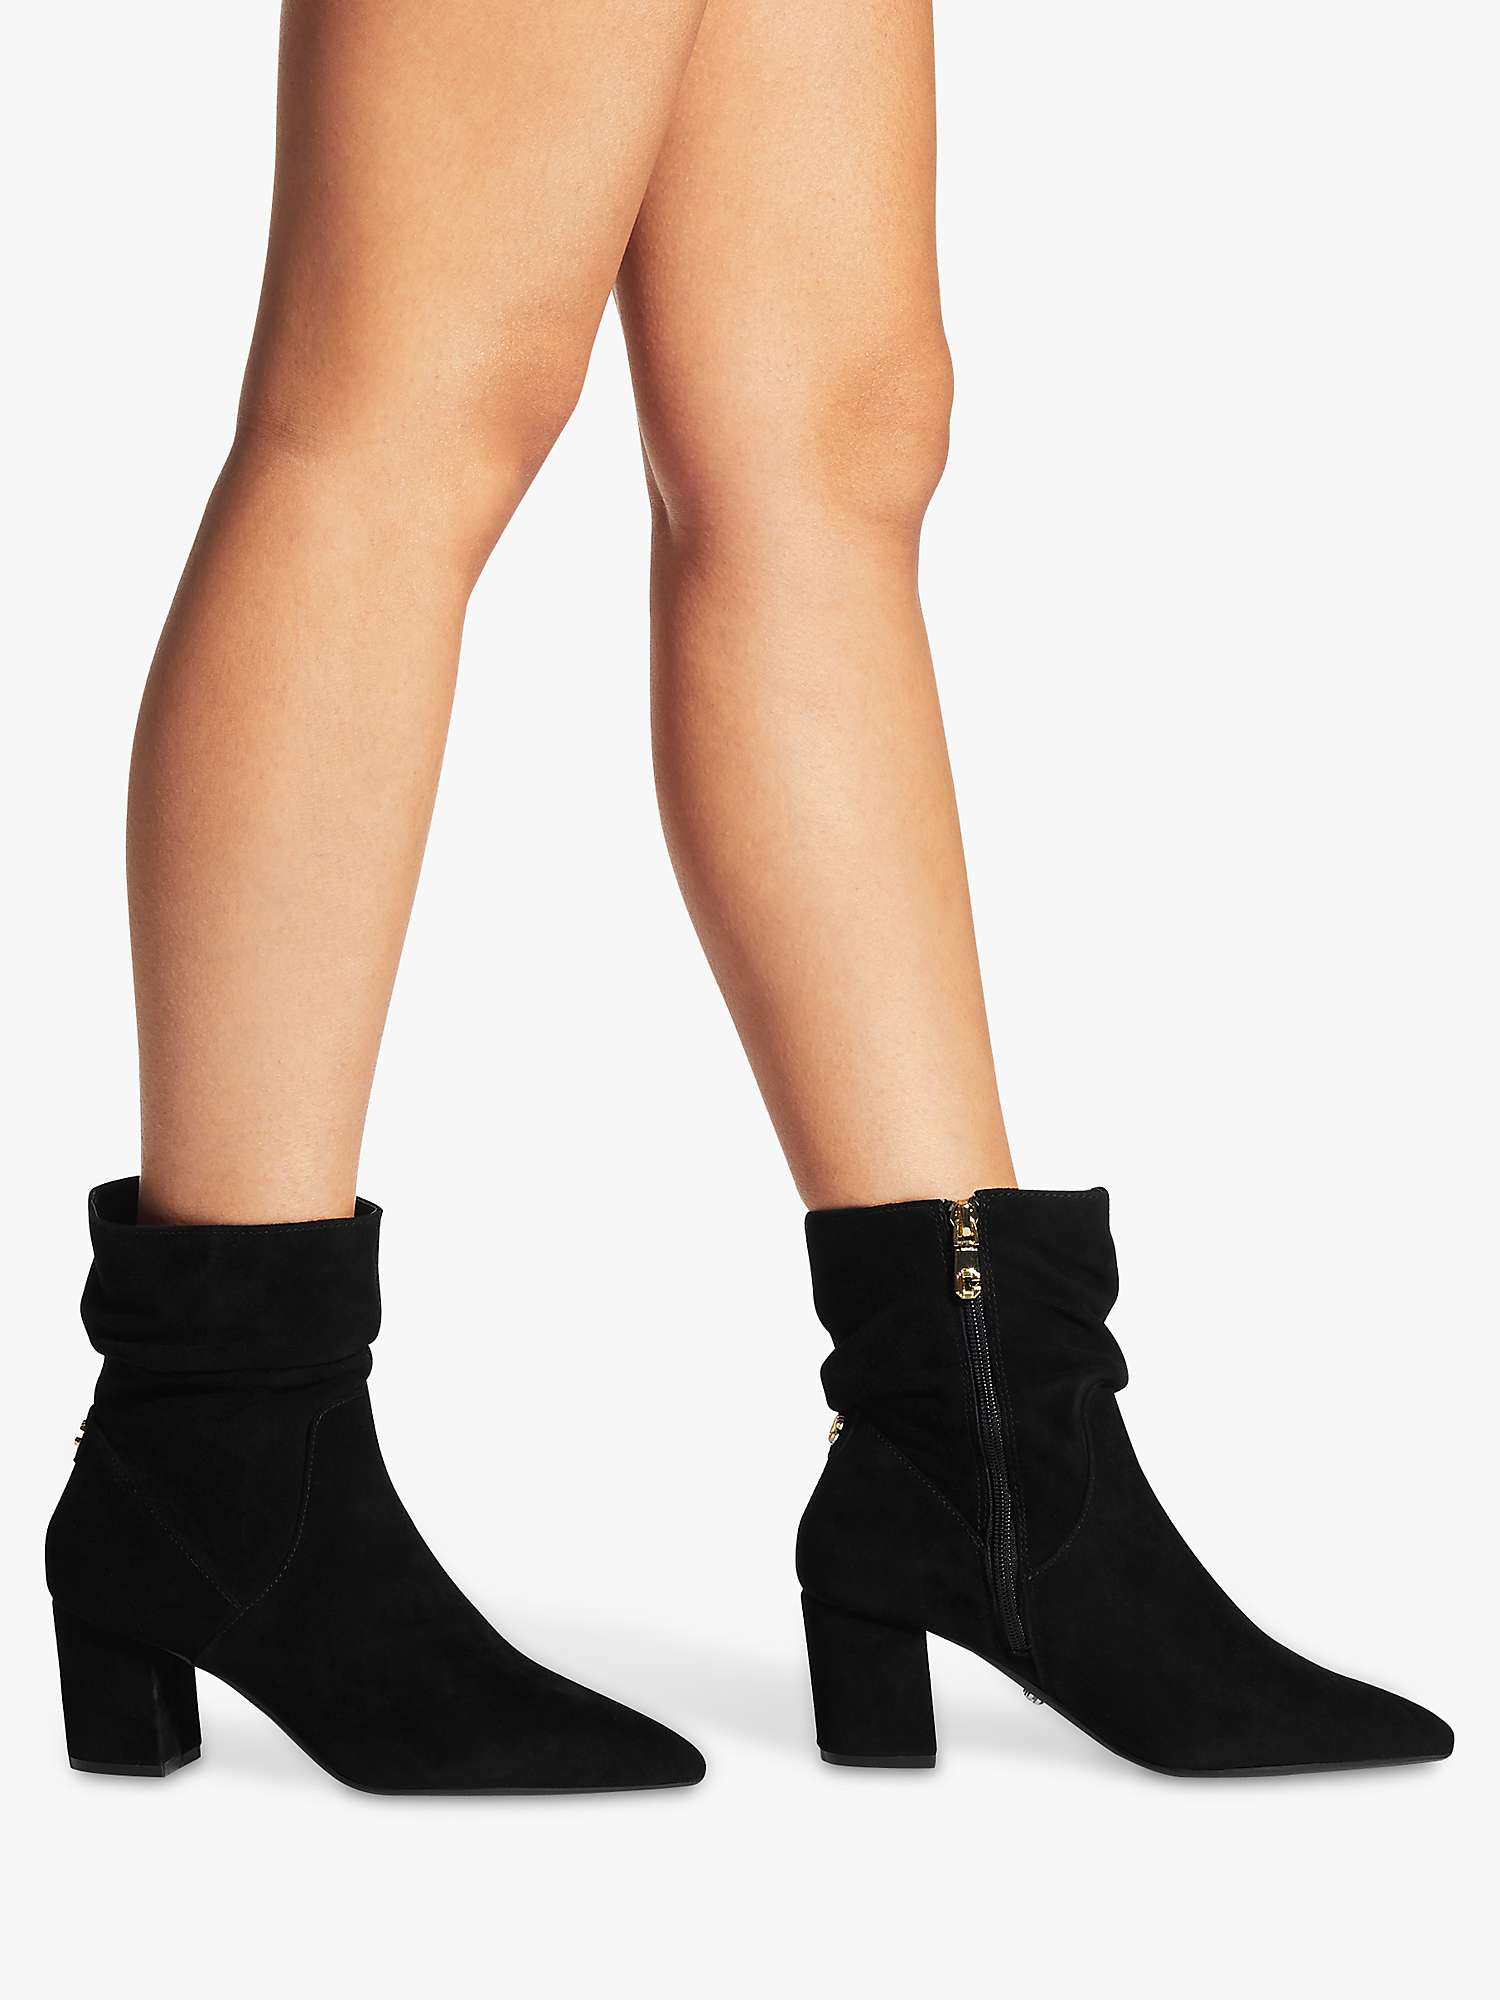 Buy Carvela Admire Low Slouch Suede Ankle Boots Online at johnlewis.com